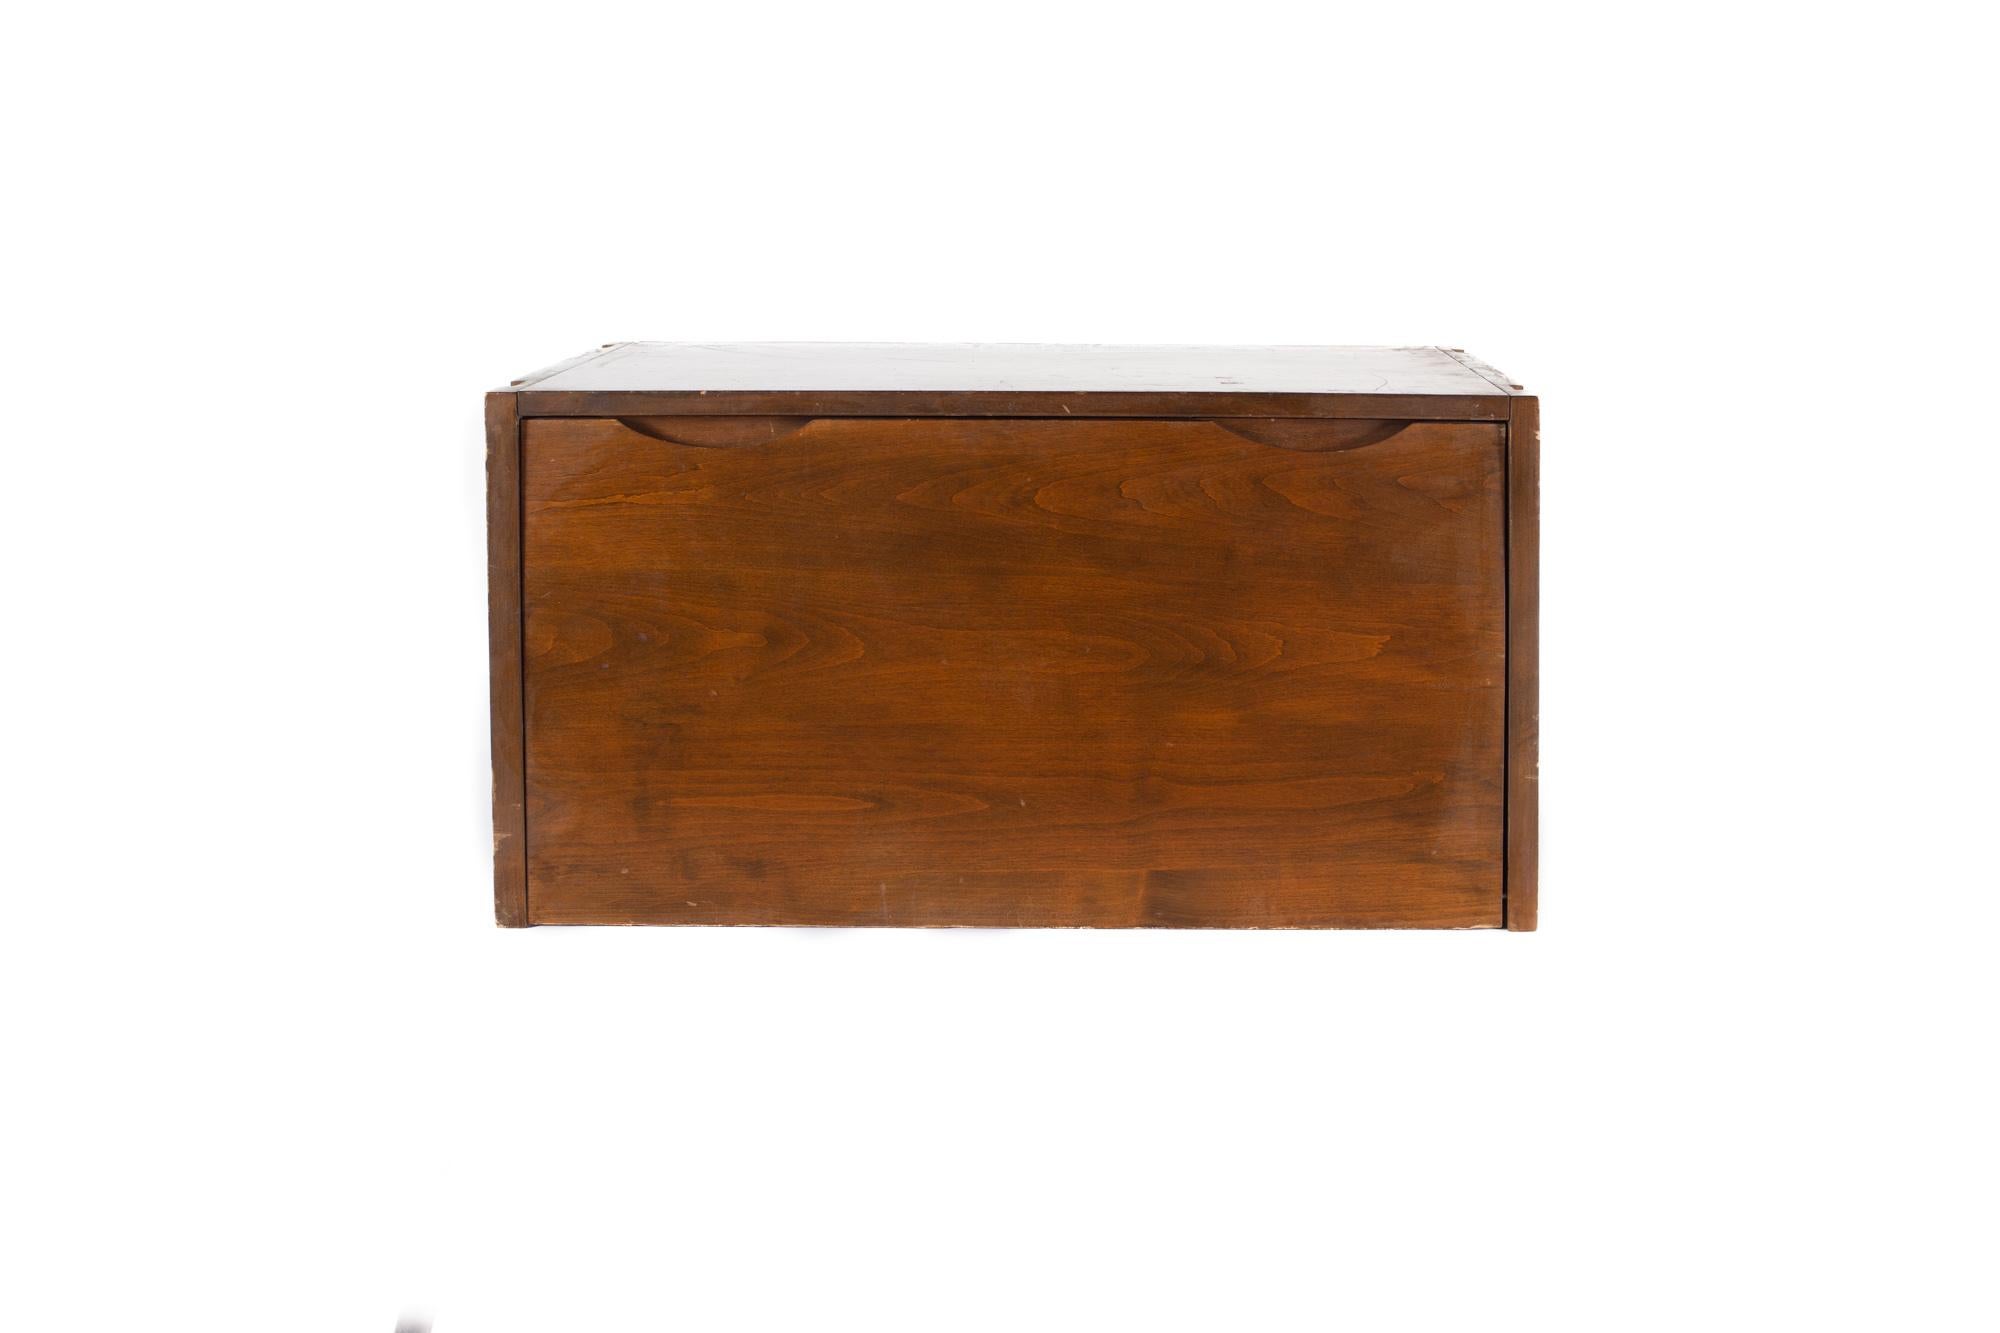 Norel Olson for Kopenhavn mid century bar desk cabinet

The cabinet measures: 32 wide x 16 deep x 17 inches high

All pieces of furniture can be had in what we call restored vintage condition. That means the piece is restored upon purchase so